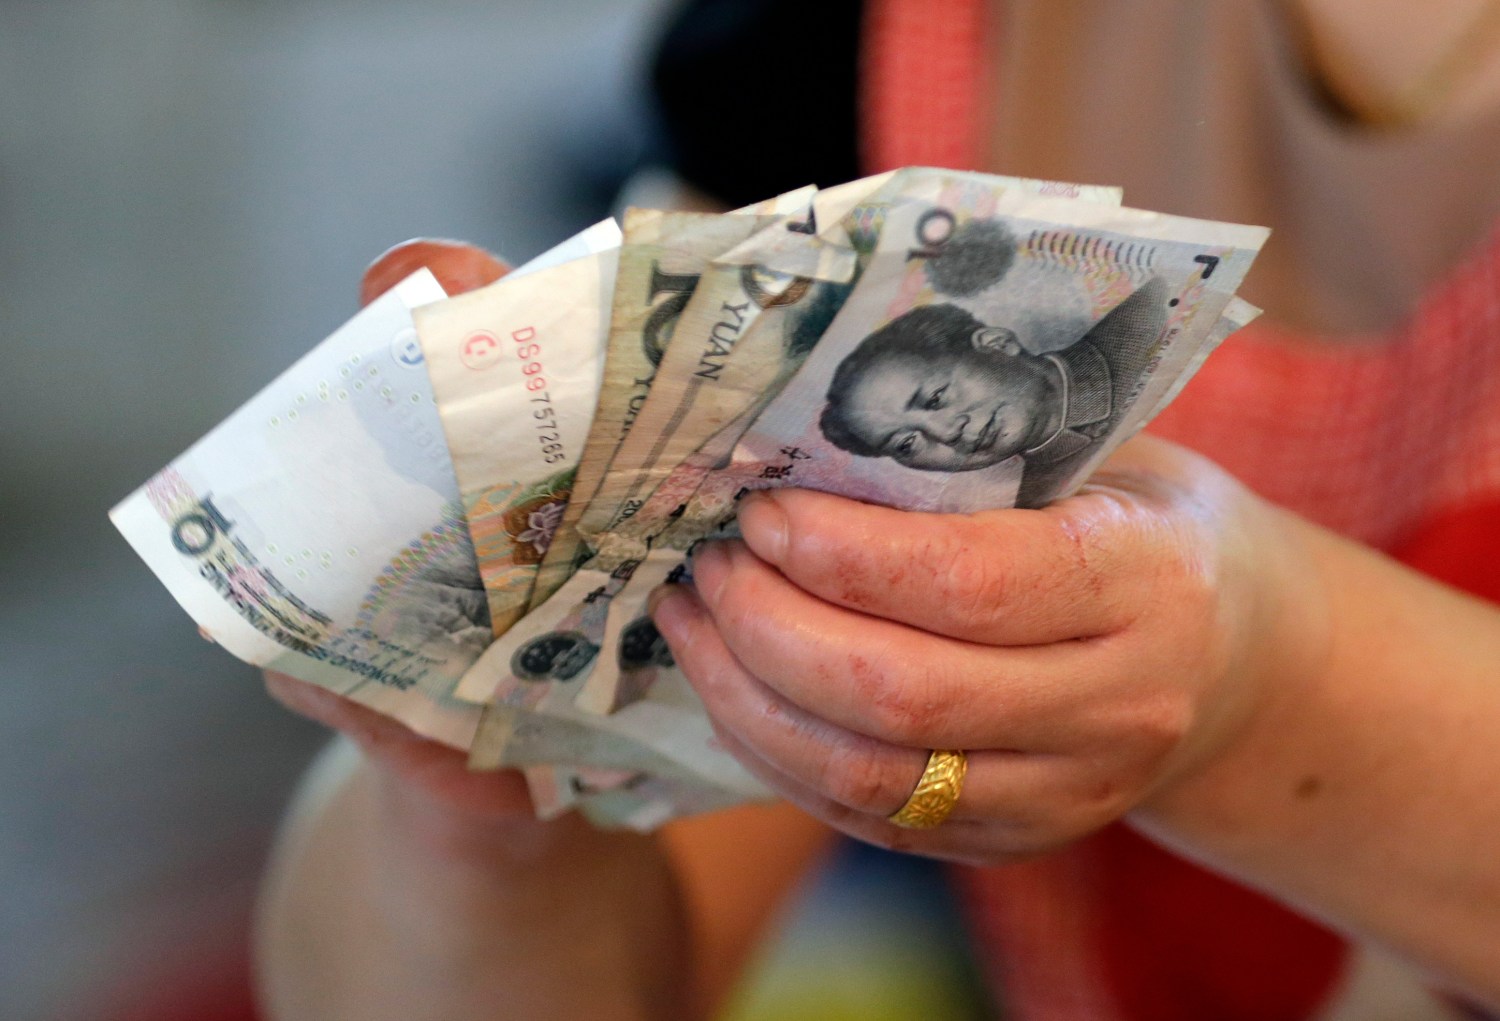 A vendor holds Chinese Yuan notes at a market in Beijing, August 12, 2015. China shocked global markets on Tuesday by devaluing its currency after a run of poor economic data, a move it billed as a free-market reform but which some experts suspect could be the beginning of a longer-term slide in the exchange rate. REUTERS/Jason Lee - SR1EB8C09B142